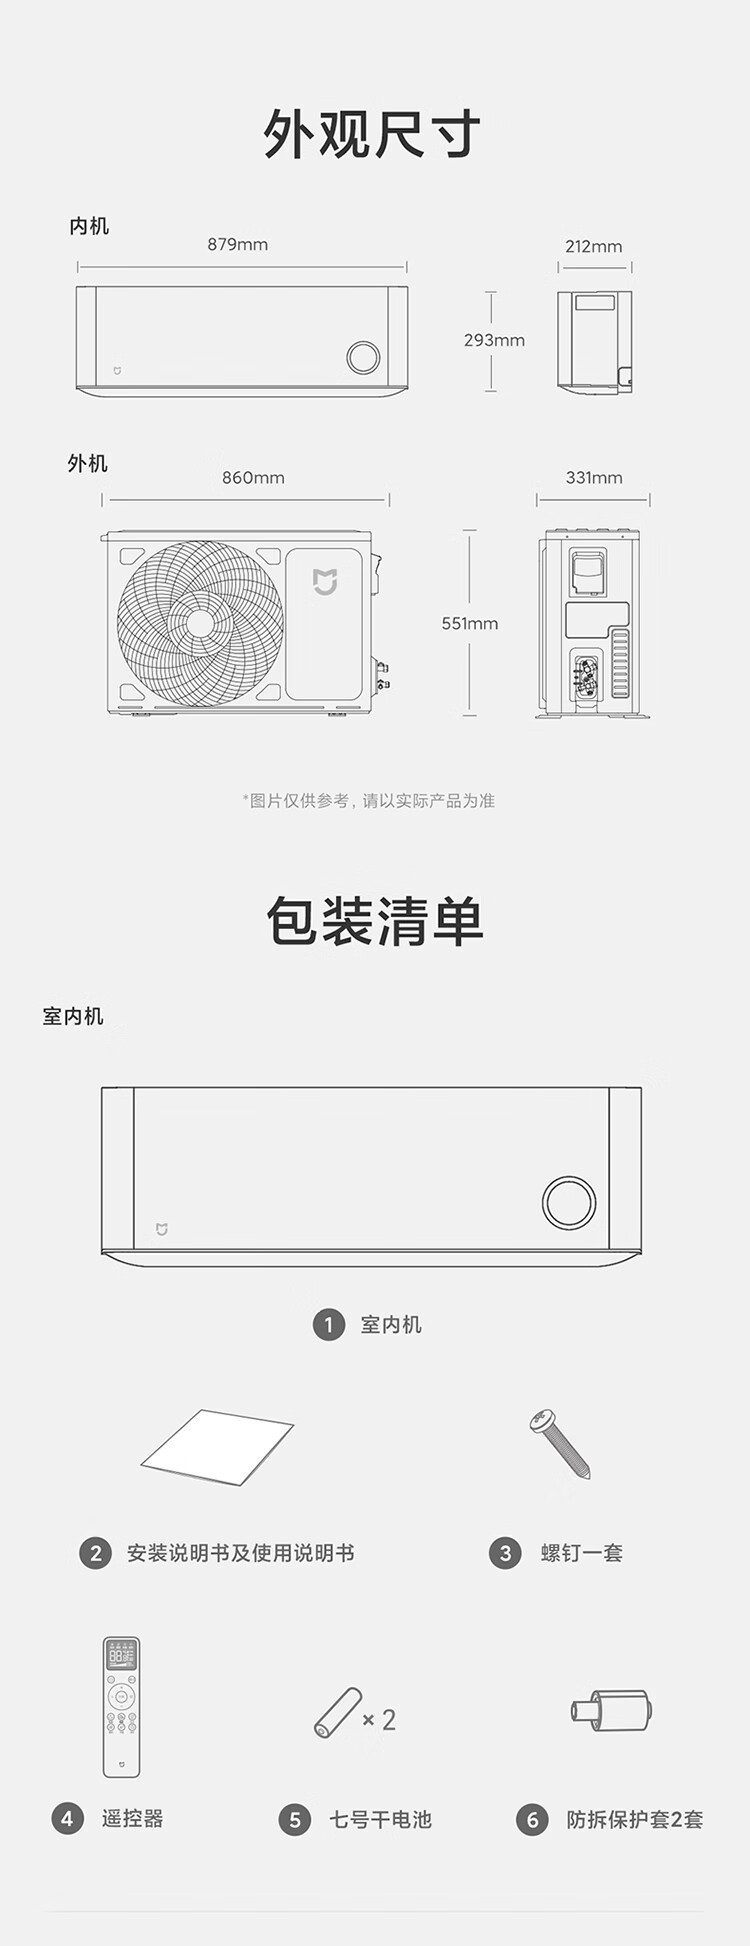 Millet Air Conditioner Is 1.5-horse First-class Frequency Conversion Household Intelligent Living Room Cooling And Heating Energy-saving Natural Wind Official Website Air Conditioner.